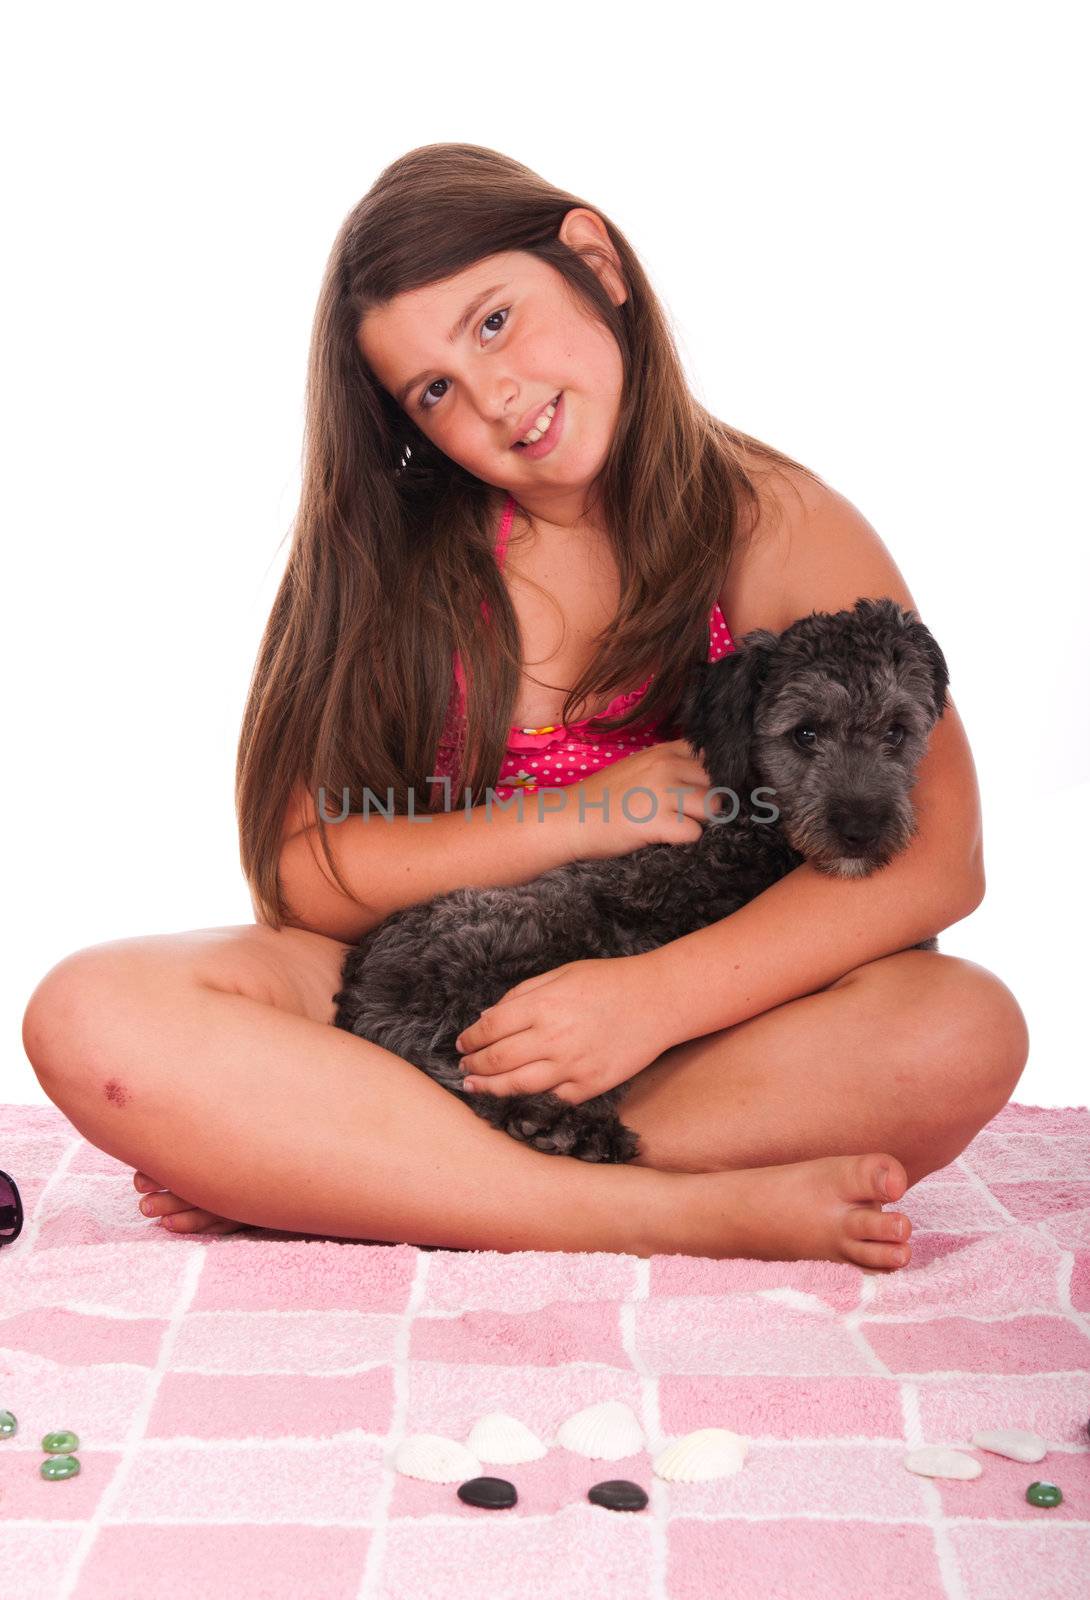 smiling brunette teenage girl in swimsuit at the beach with her shipoo dog (studio setting with pink towel and little stones) isolated on white background